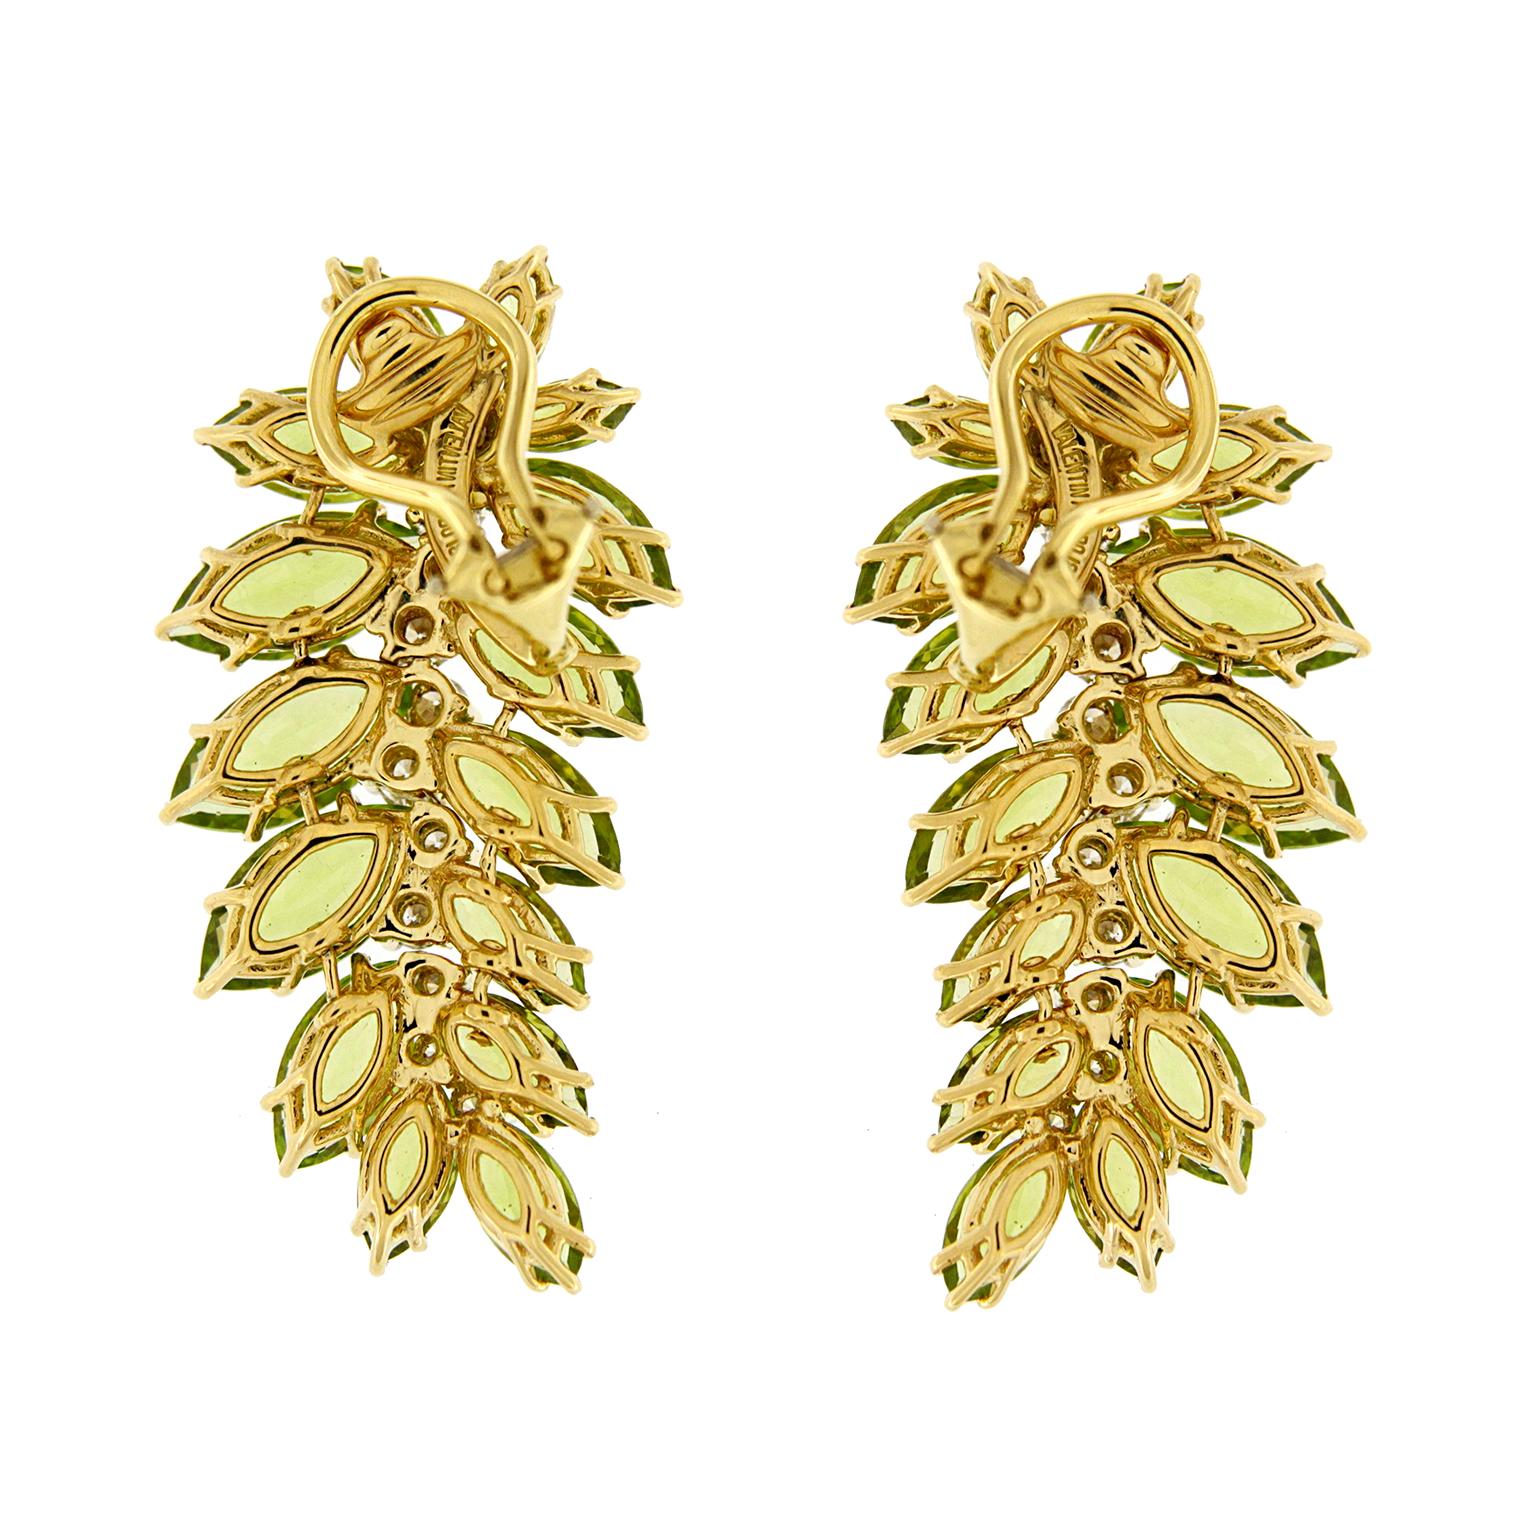 A delicate silhouette of a leaf is illustrated by lustrous peridots and brilliant cut diamonds for these drop earrings. The earrings feature various marquise cut peridots in verdant hues fanned outward. To emulate the pattern on the leaf, graduated